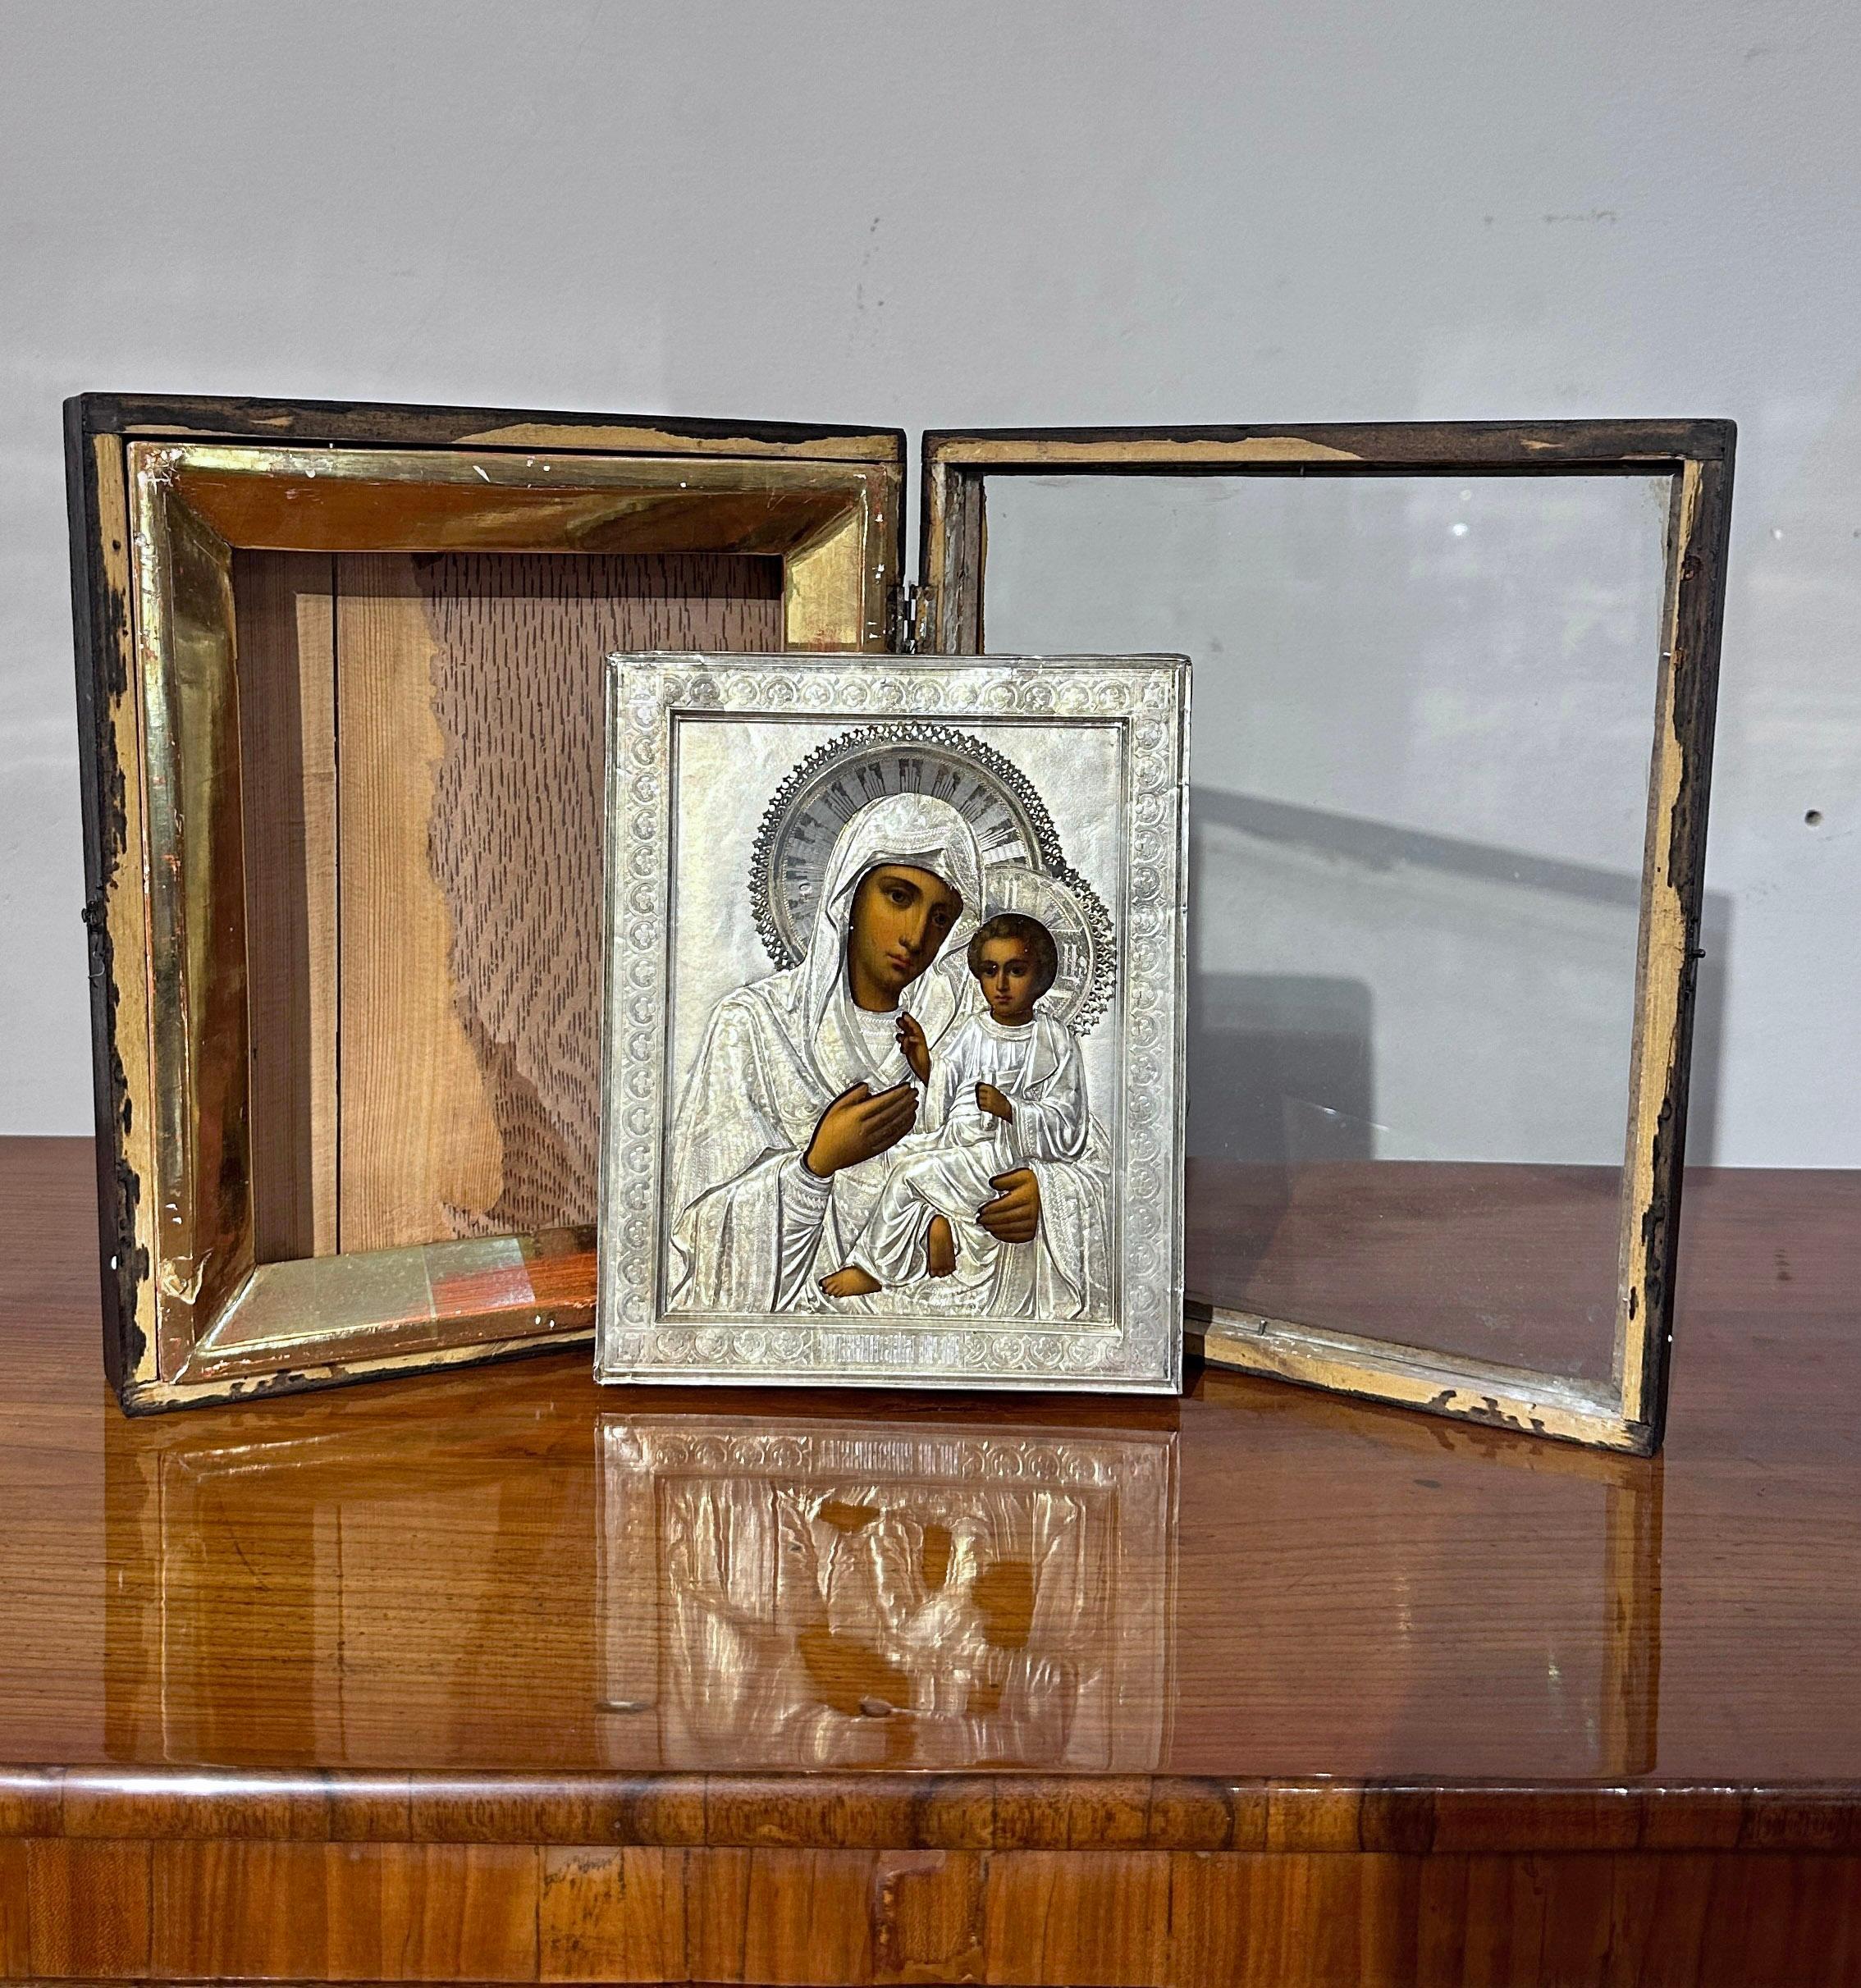 Beautiful Russian travel icon painted in oil on wooden tablet, with a refined silver lancet. The Madonna and child are represented with great skill, following the traditional style of Orthodox icons. Their clothes and background are made of finely